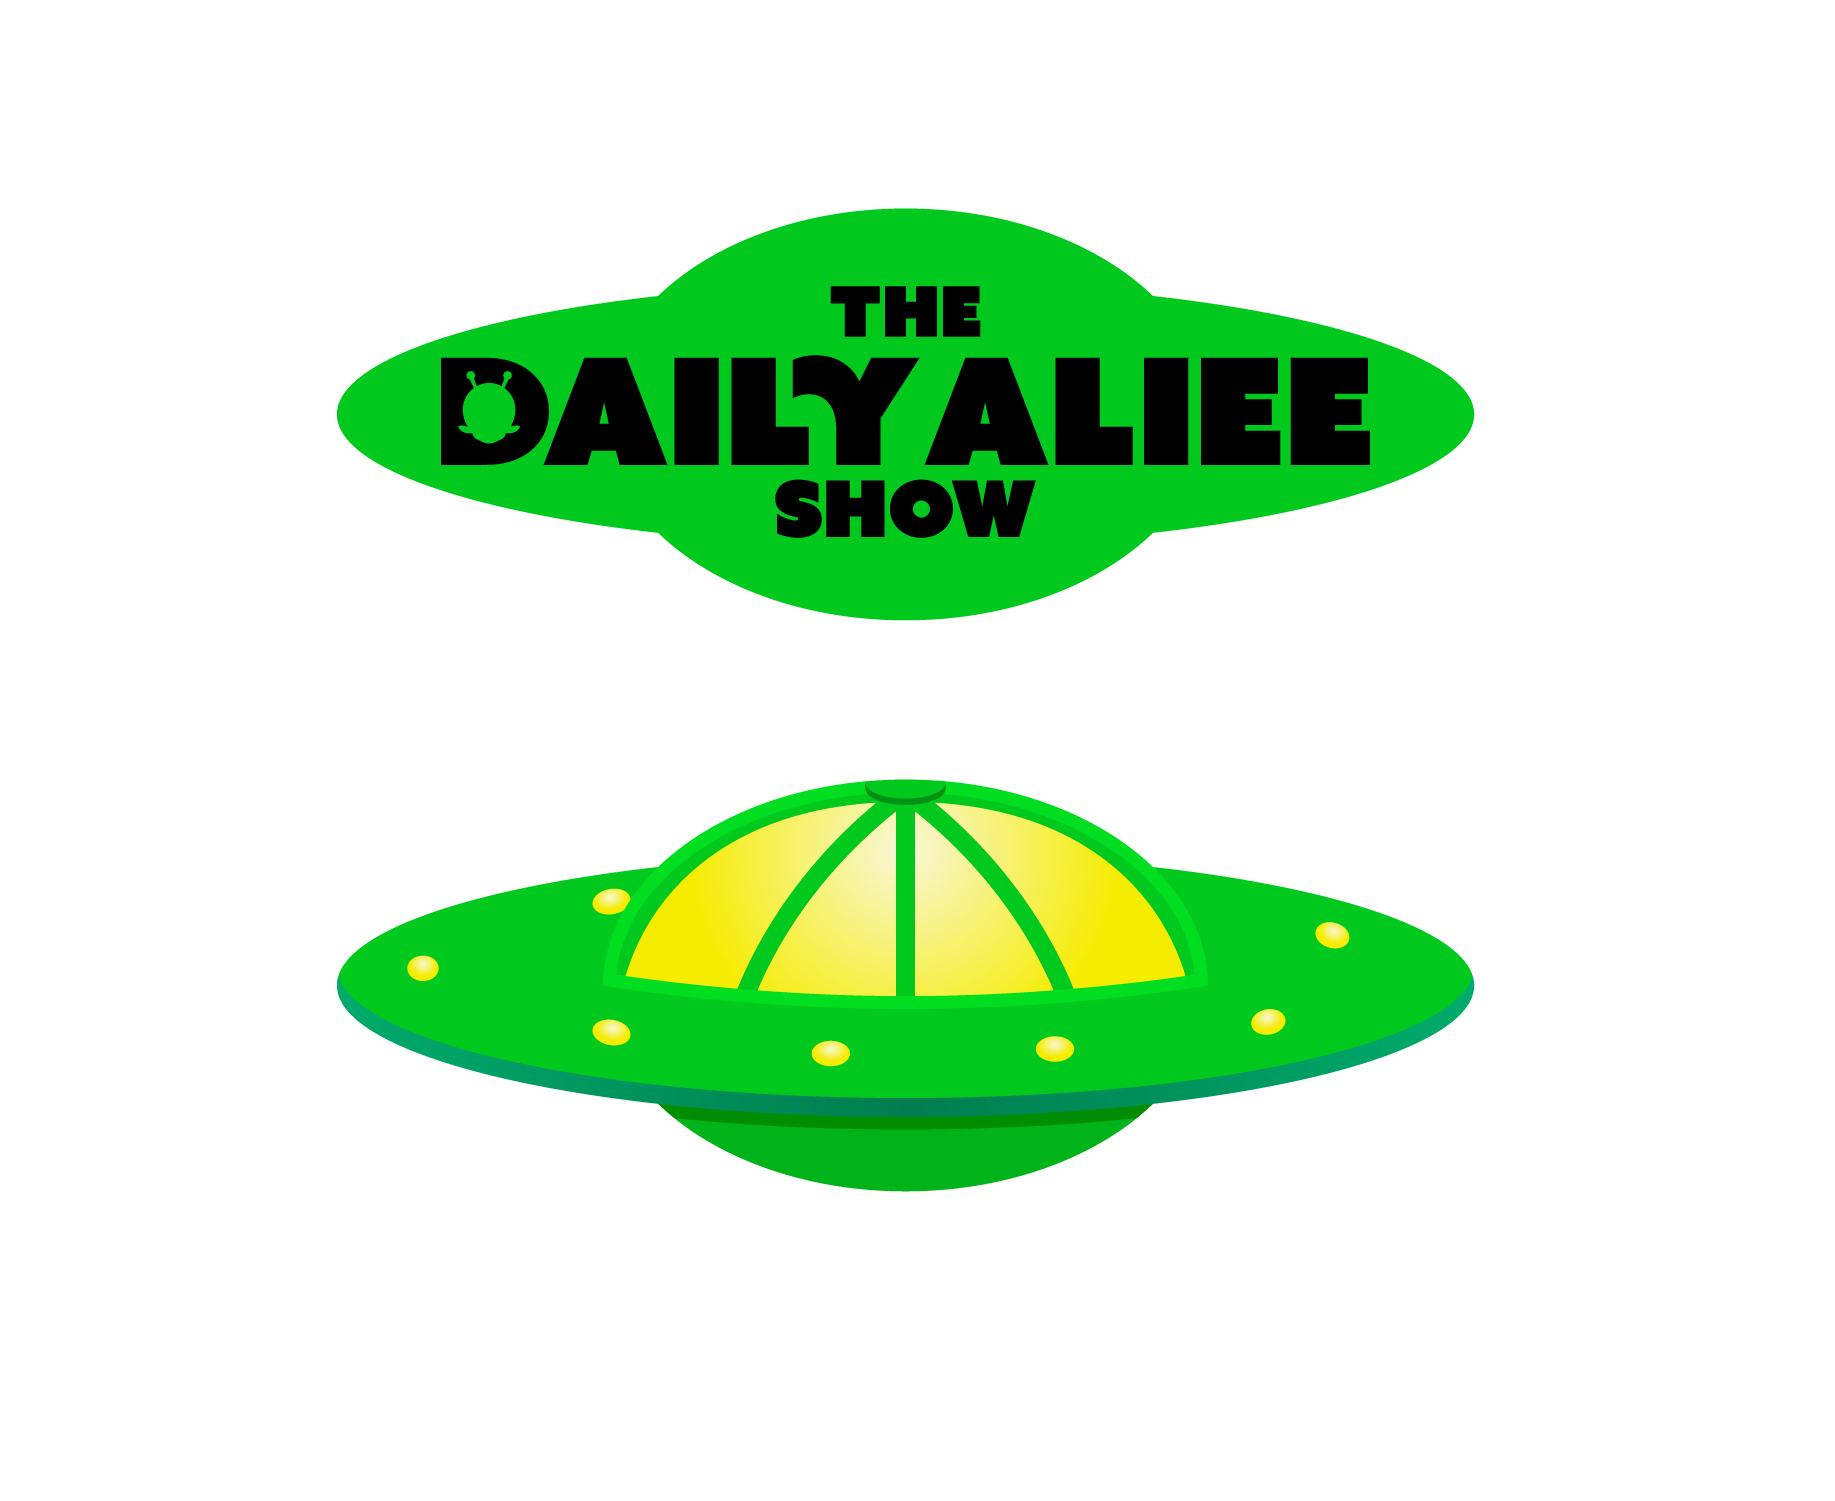 The Daily Aliee Show